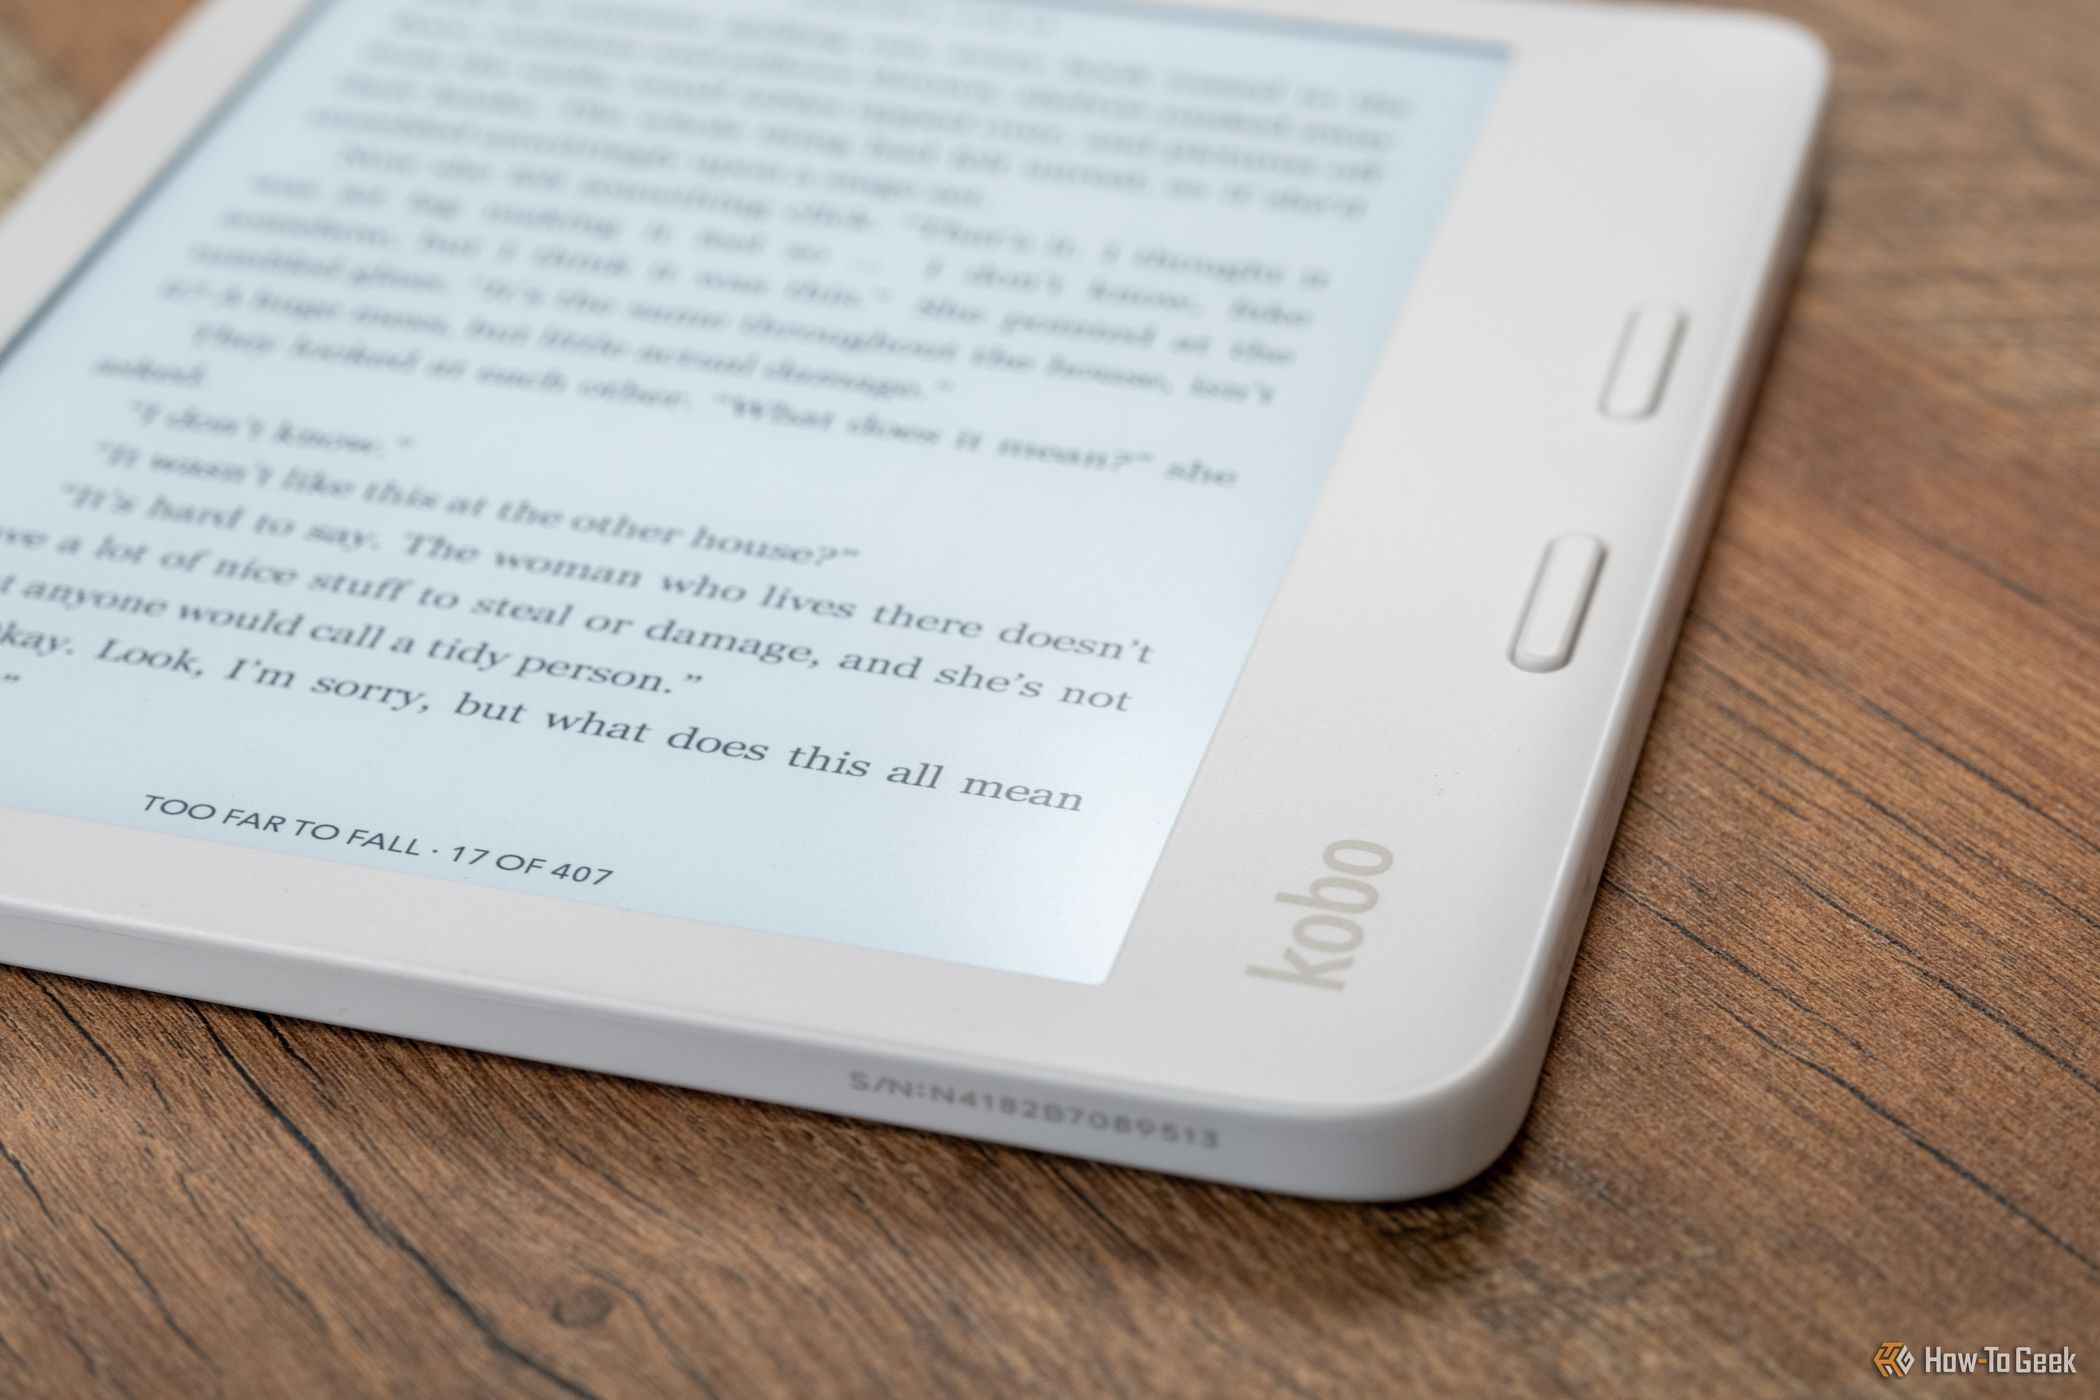 Kobo Libra 2 e-reader review: Freedom with a small price